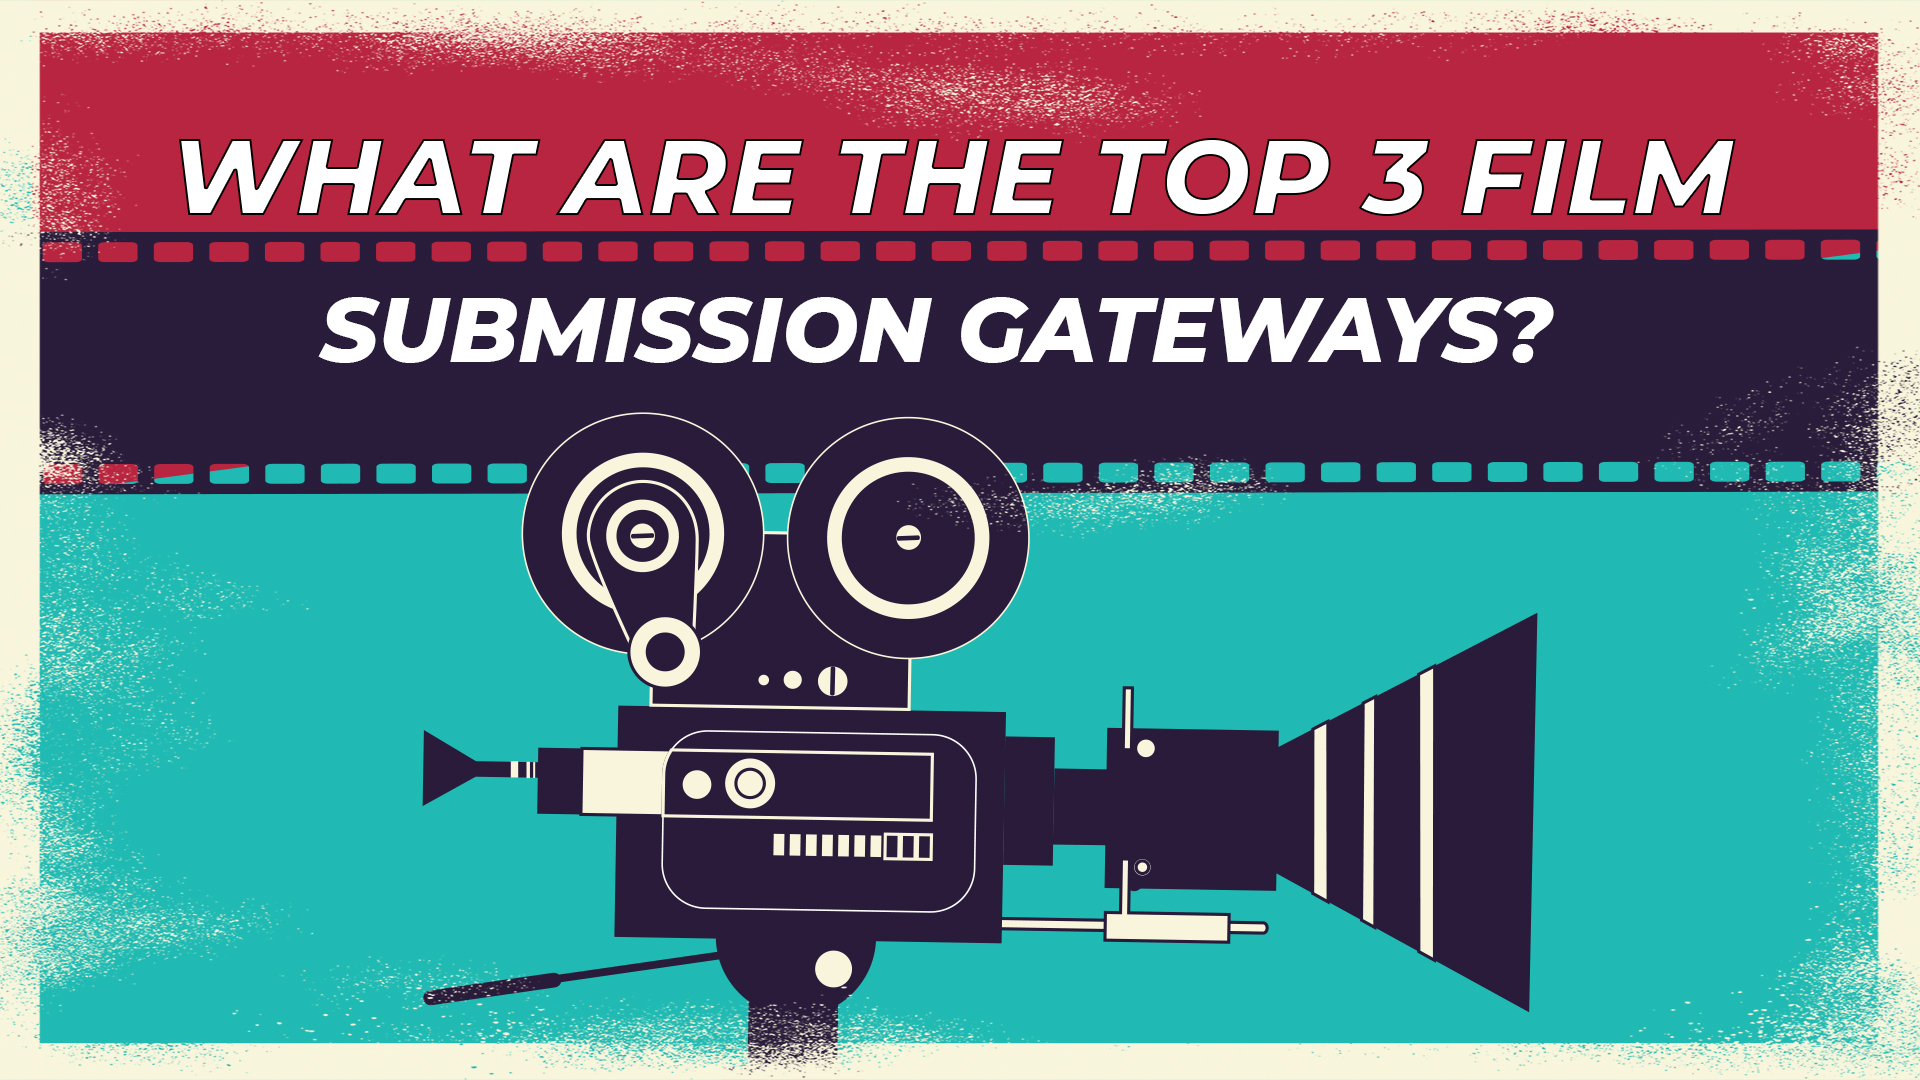 What are the top 3 Film Submission Gateways?